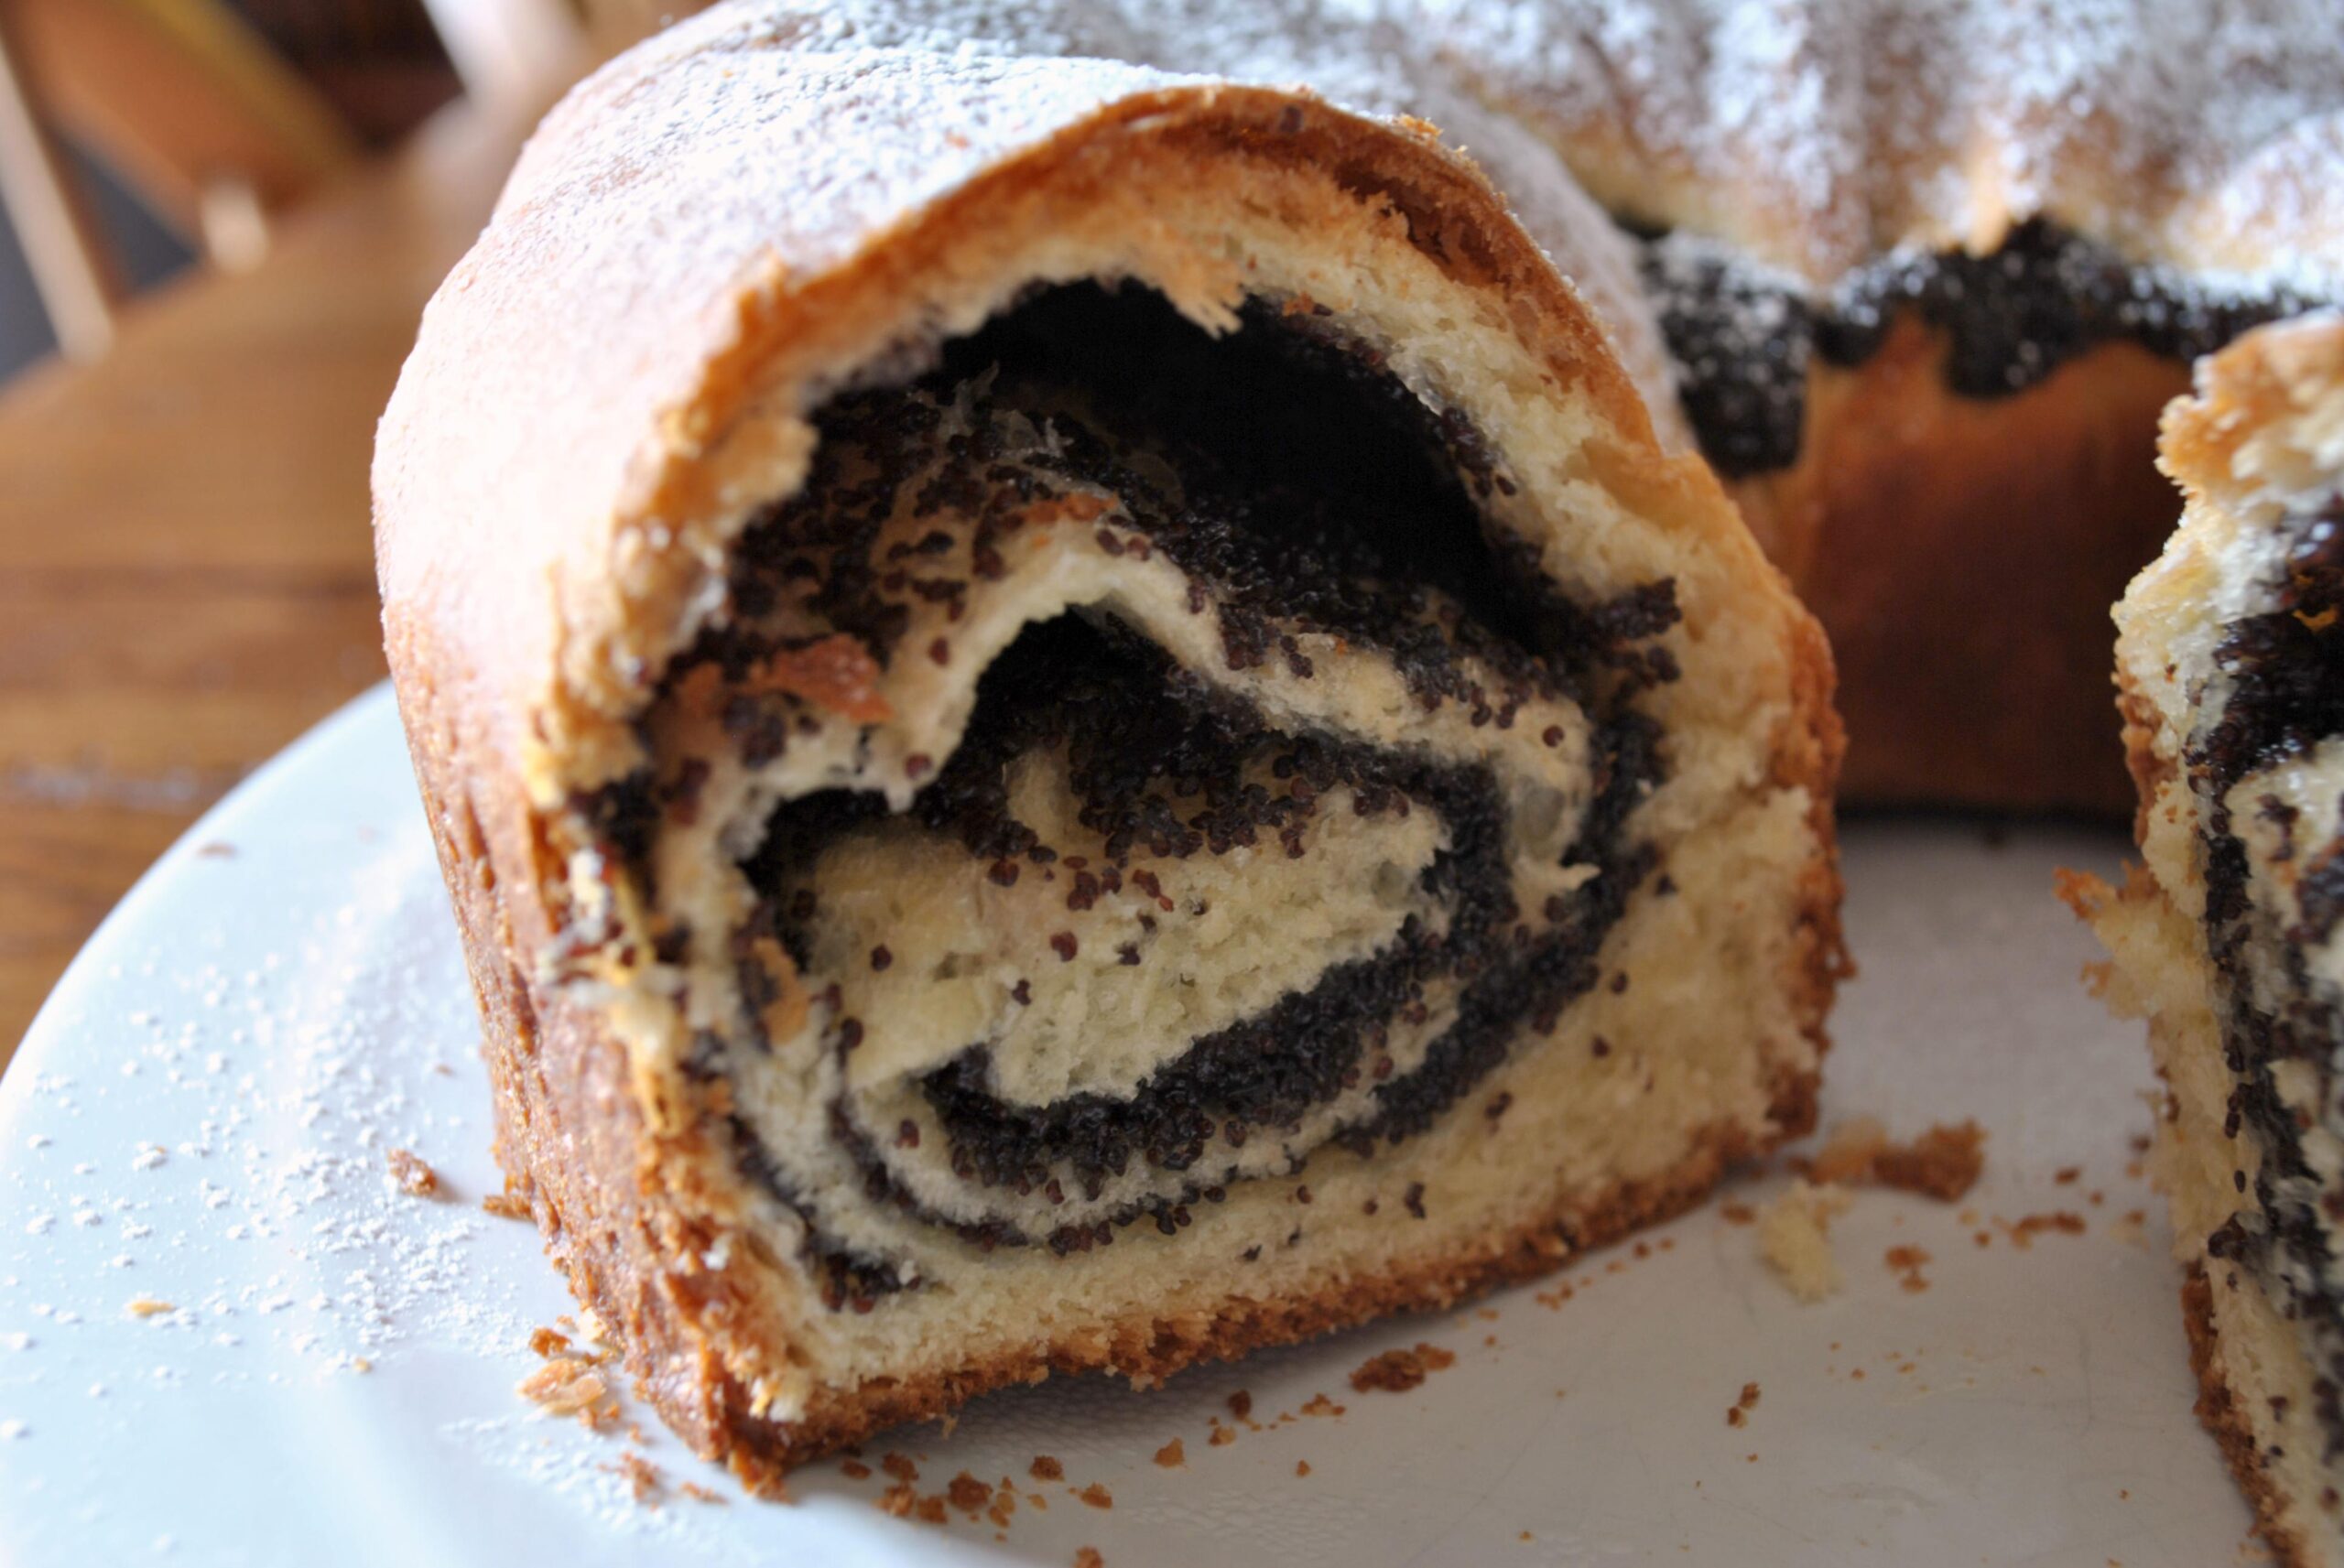  The aroma of cinnamon and sweetness of poppy seed will take your senses on a culinary journey.